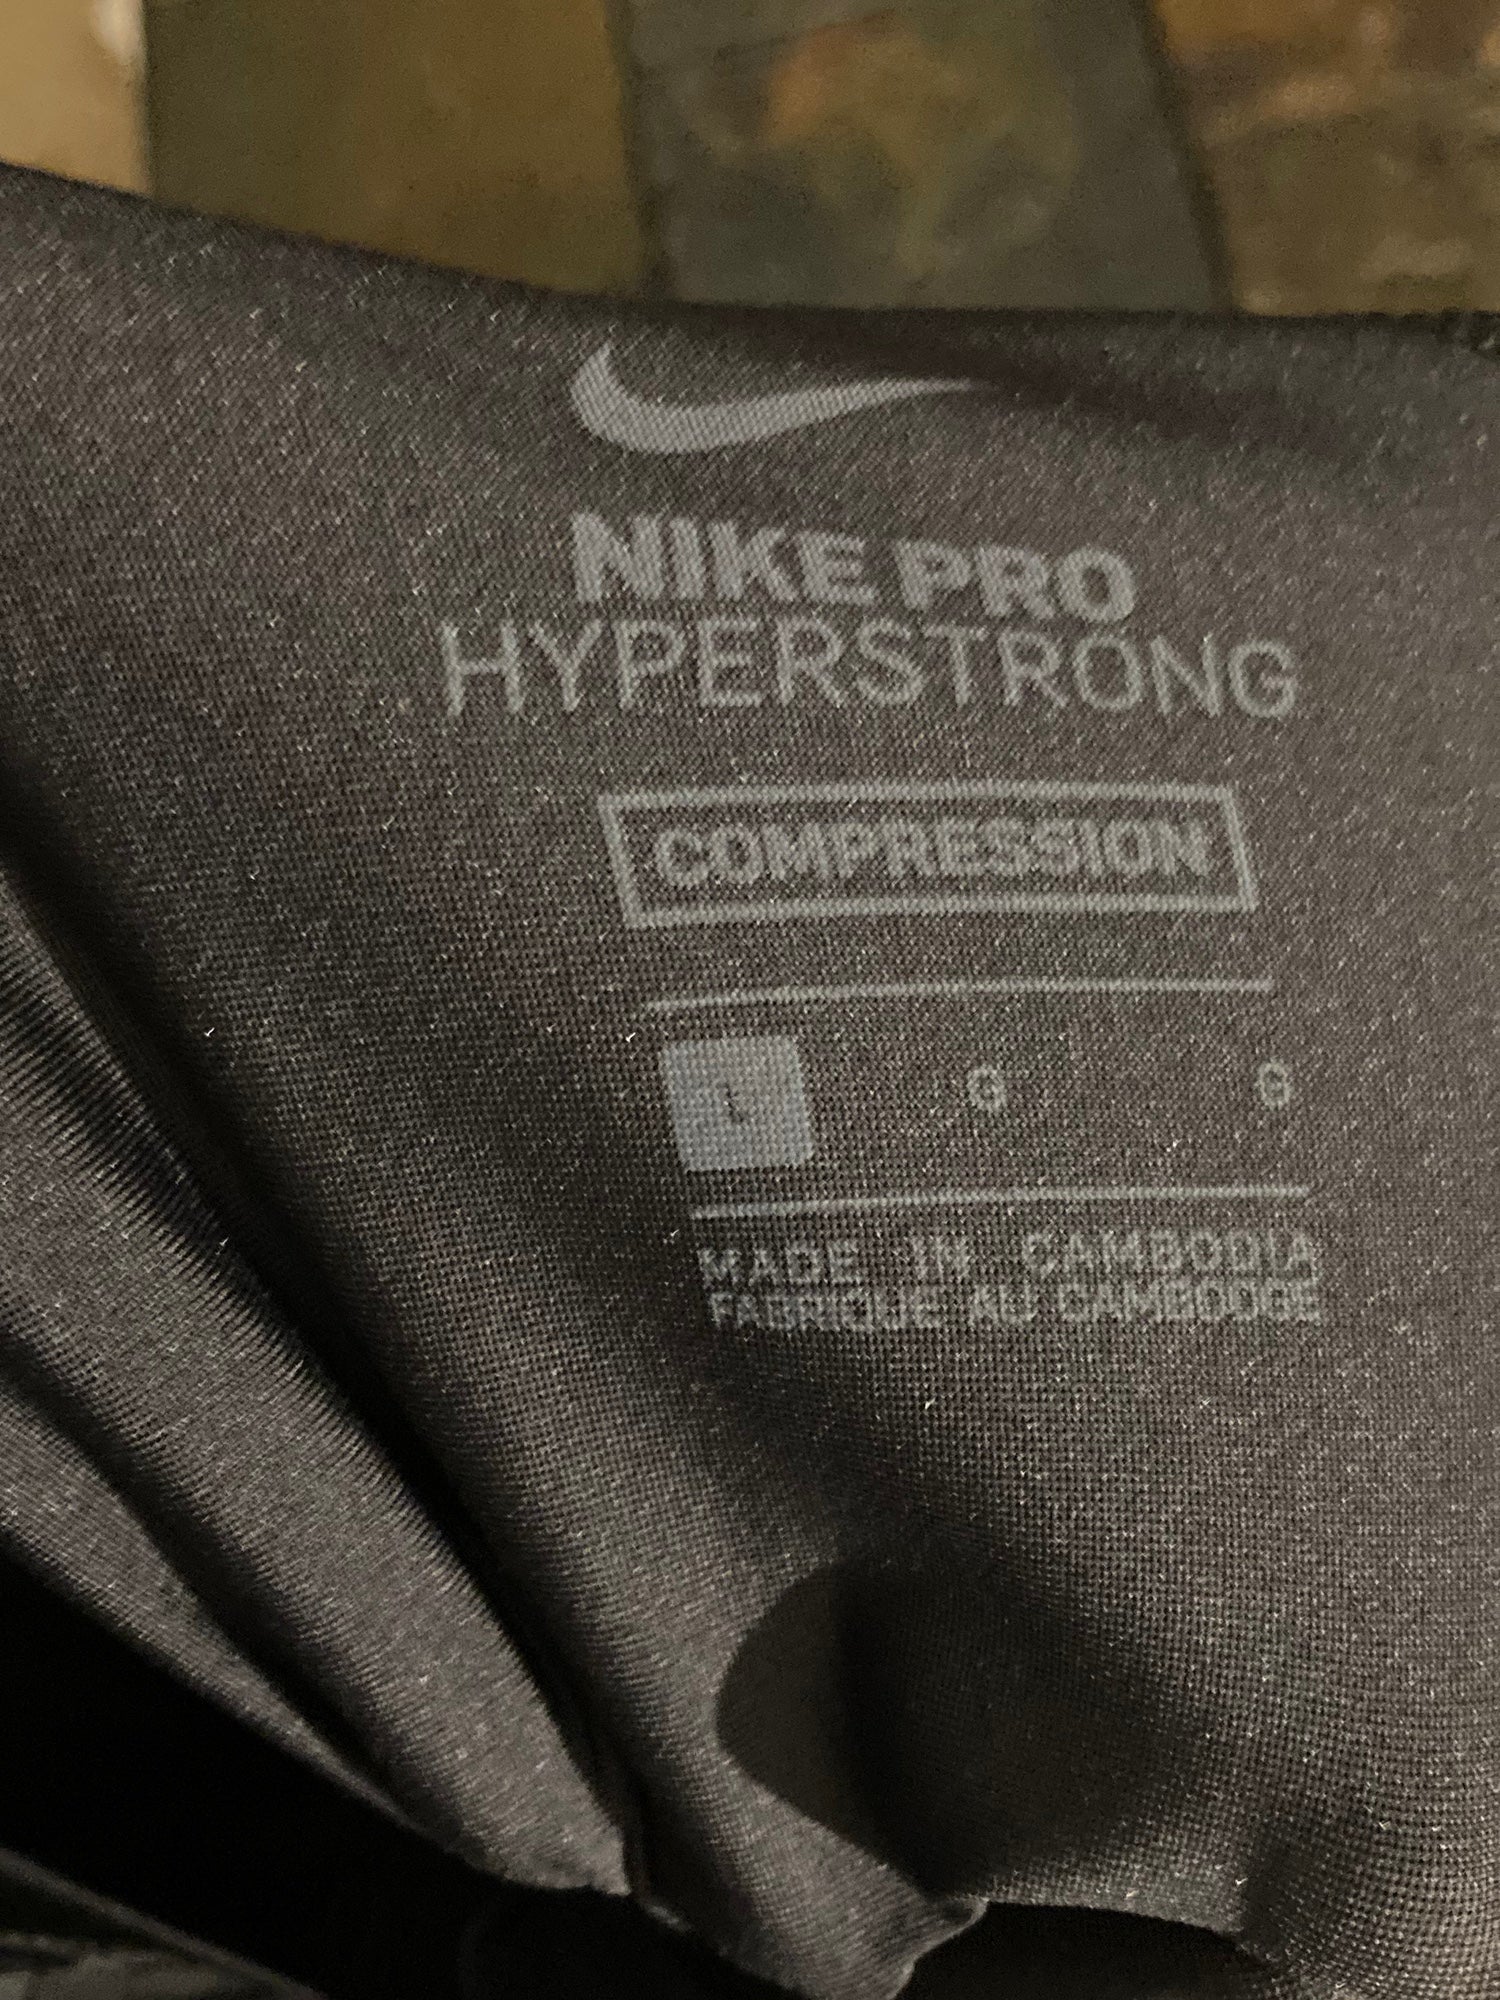 NIKE Pro Hyperstrong Padded Compression Shirt Adult XXL Black Football  Athletic